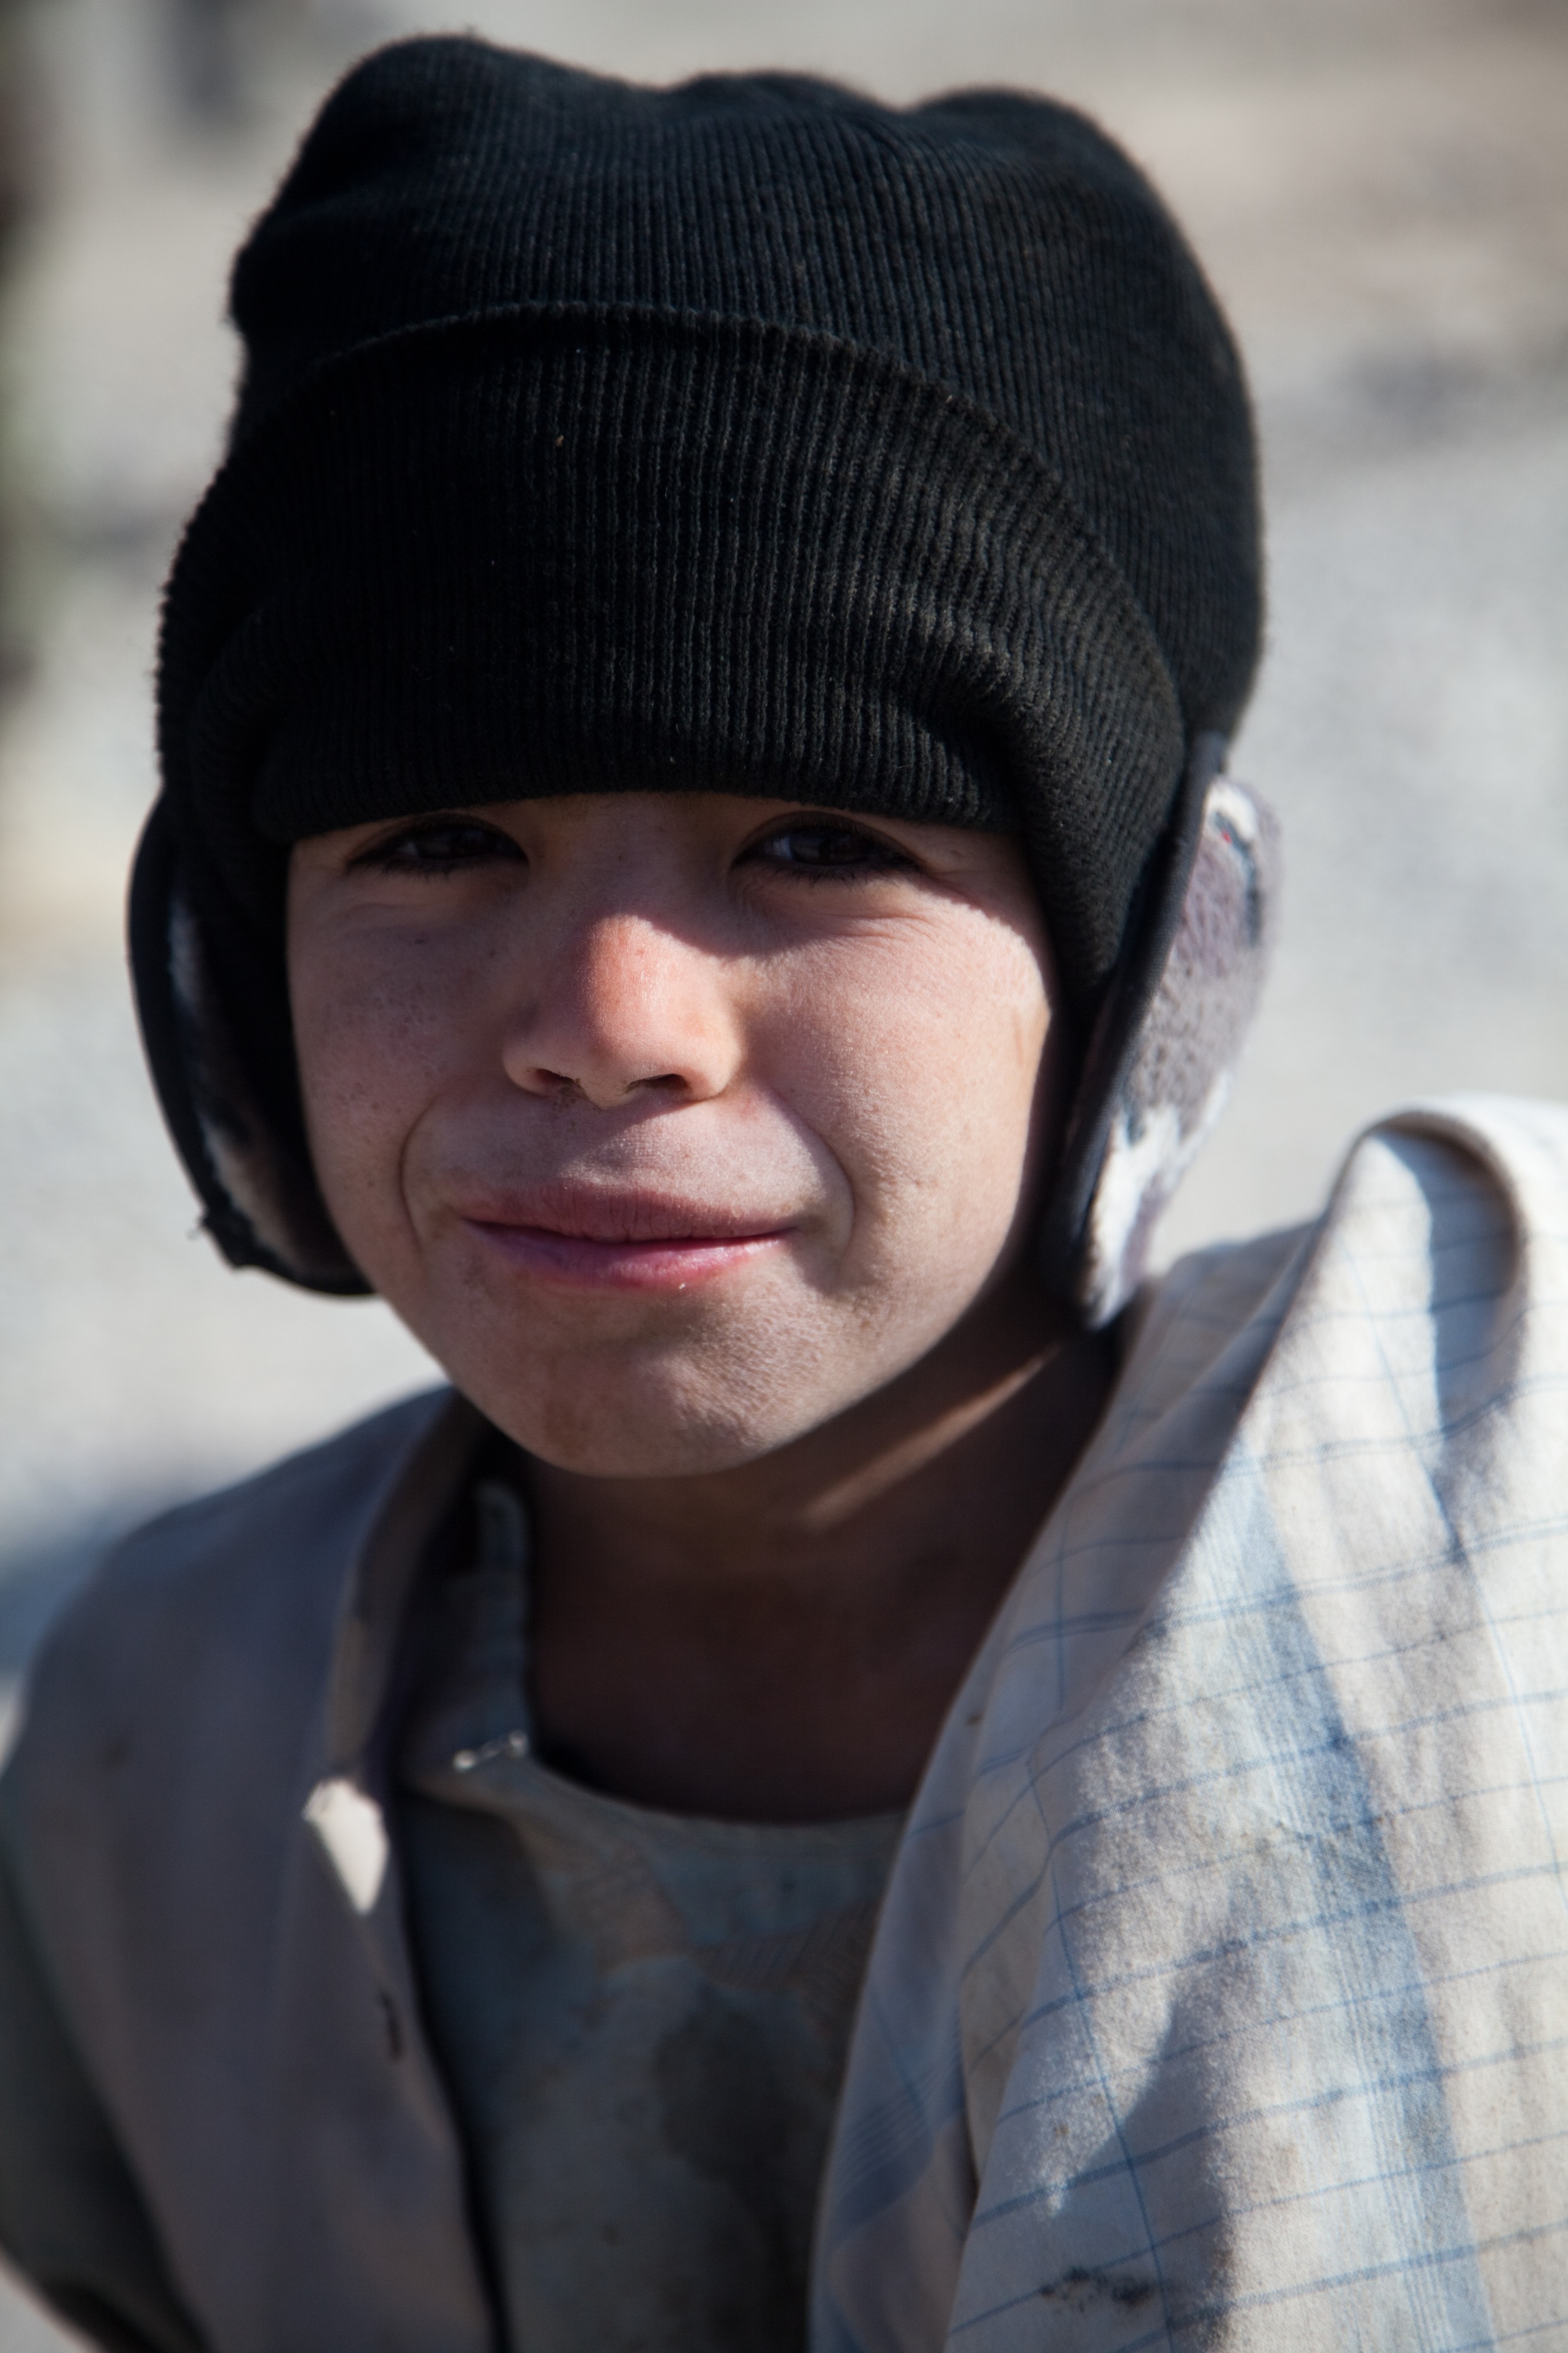 A boy poses for a photograph in the Ananzai village in Kandahar province, Afghanistan, Dec. 26, 2011 111226-A-VB845-047